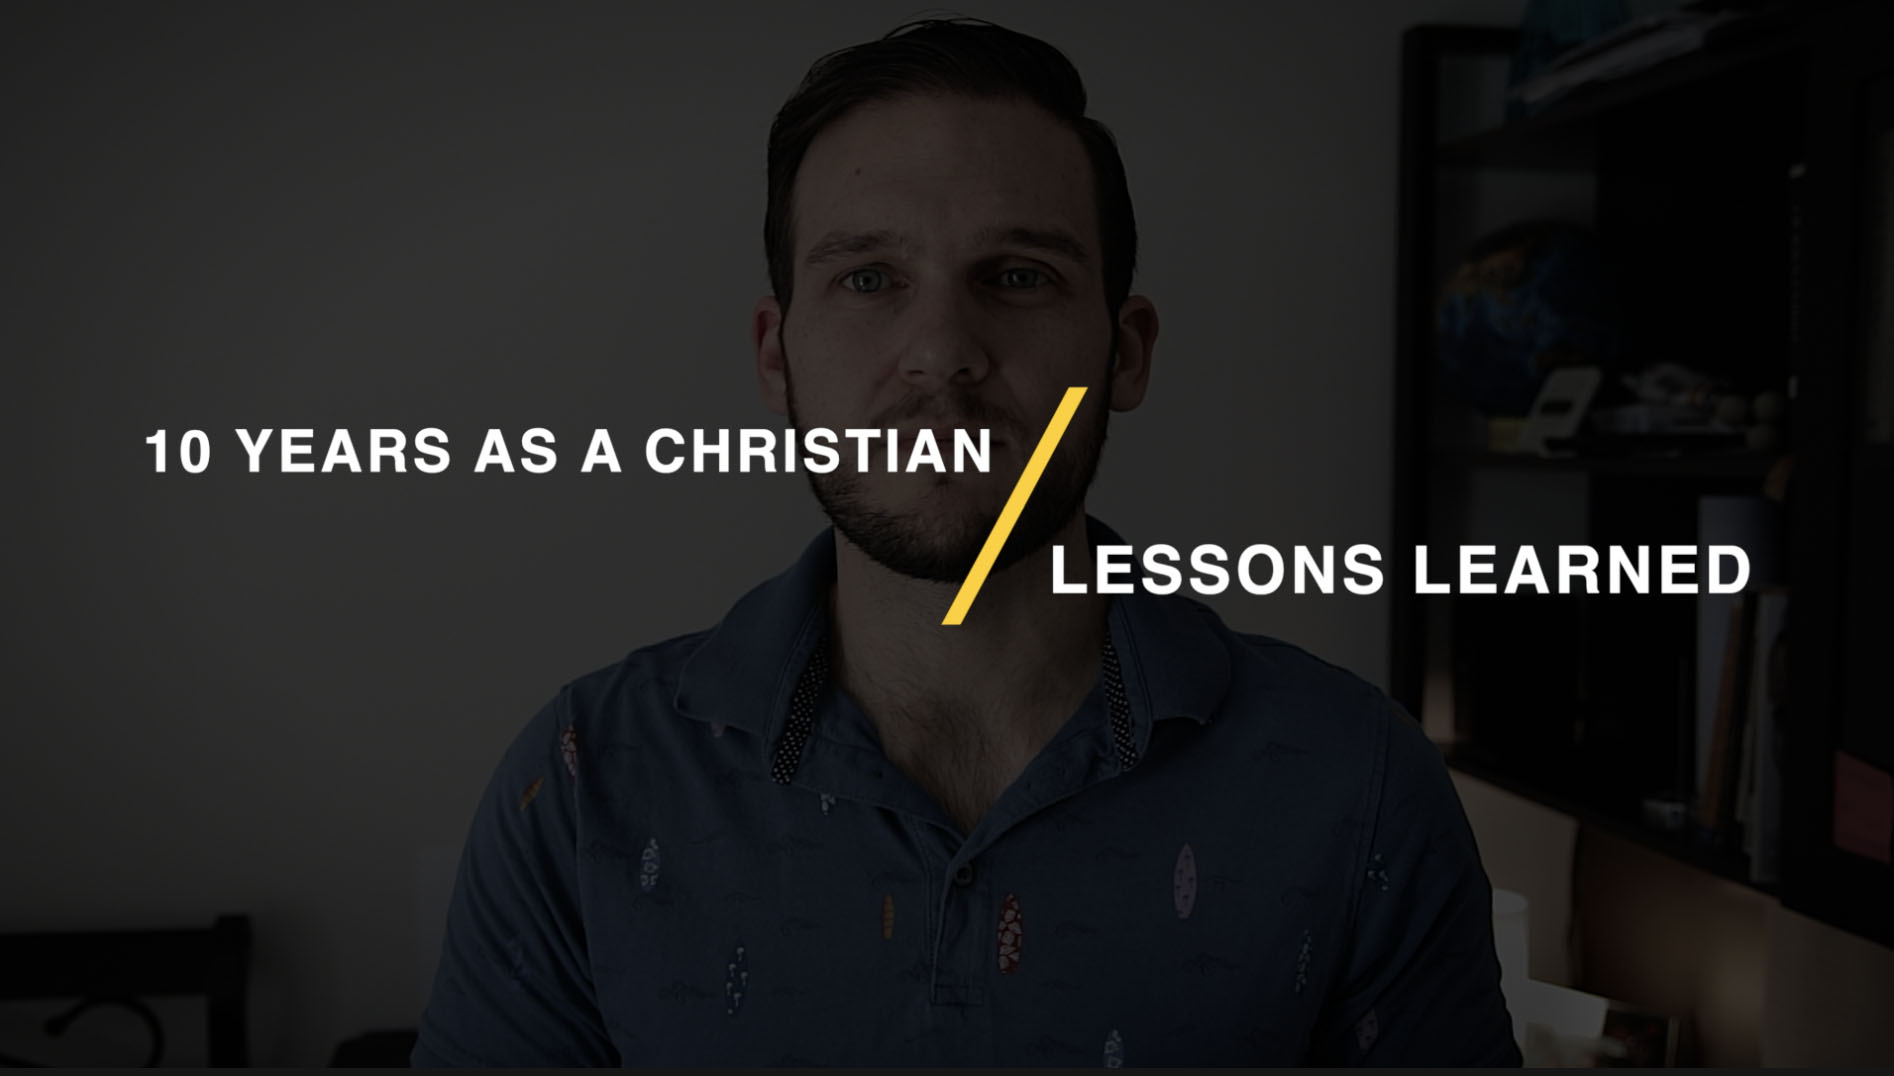 14 Lessons from 10 years As a Christian